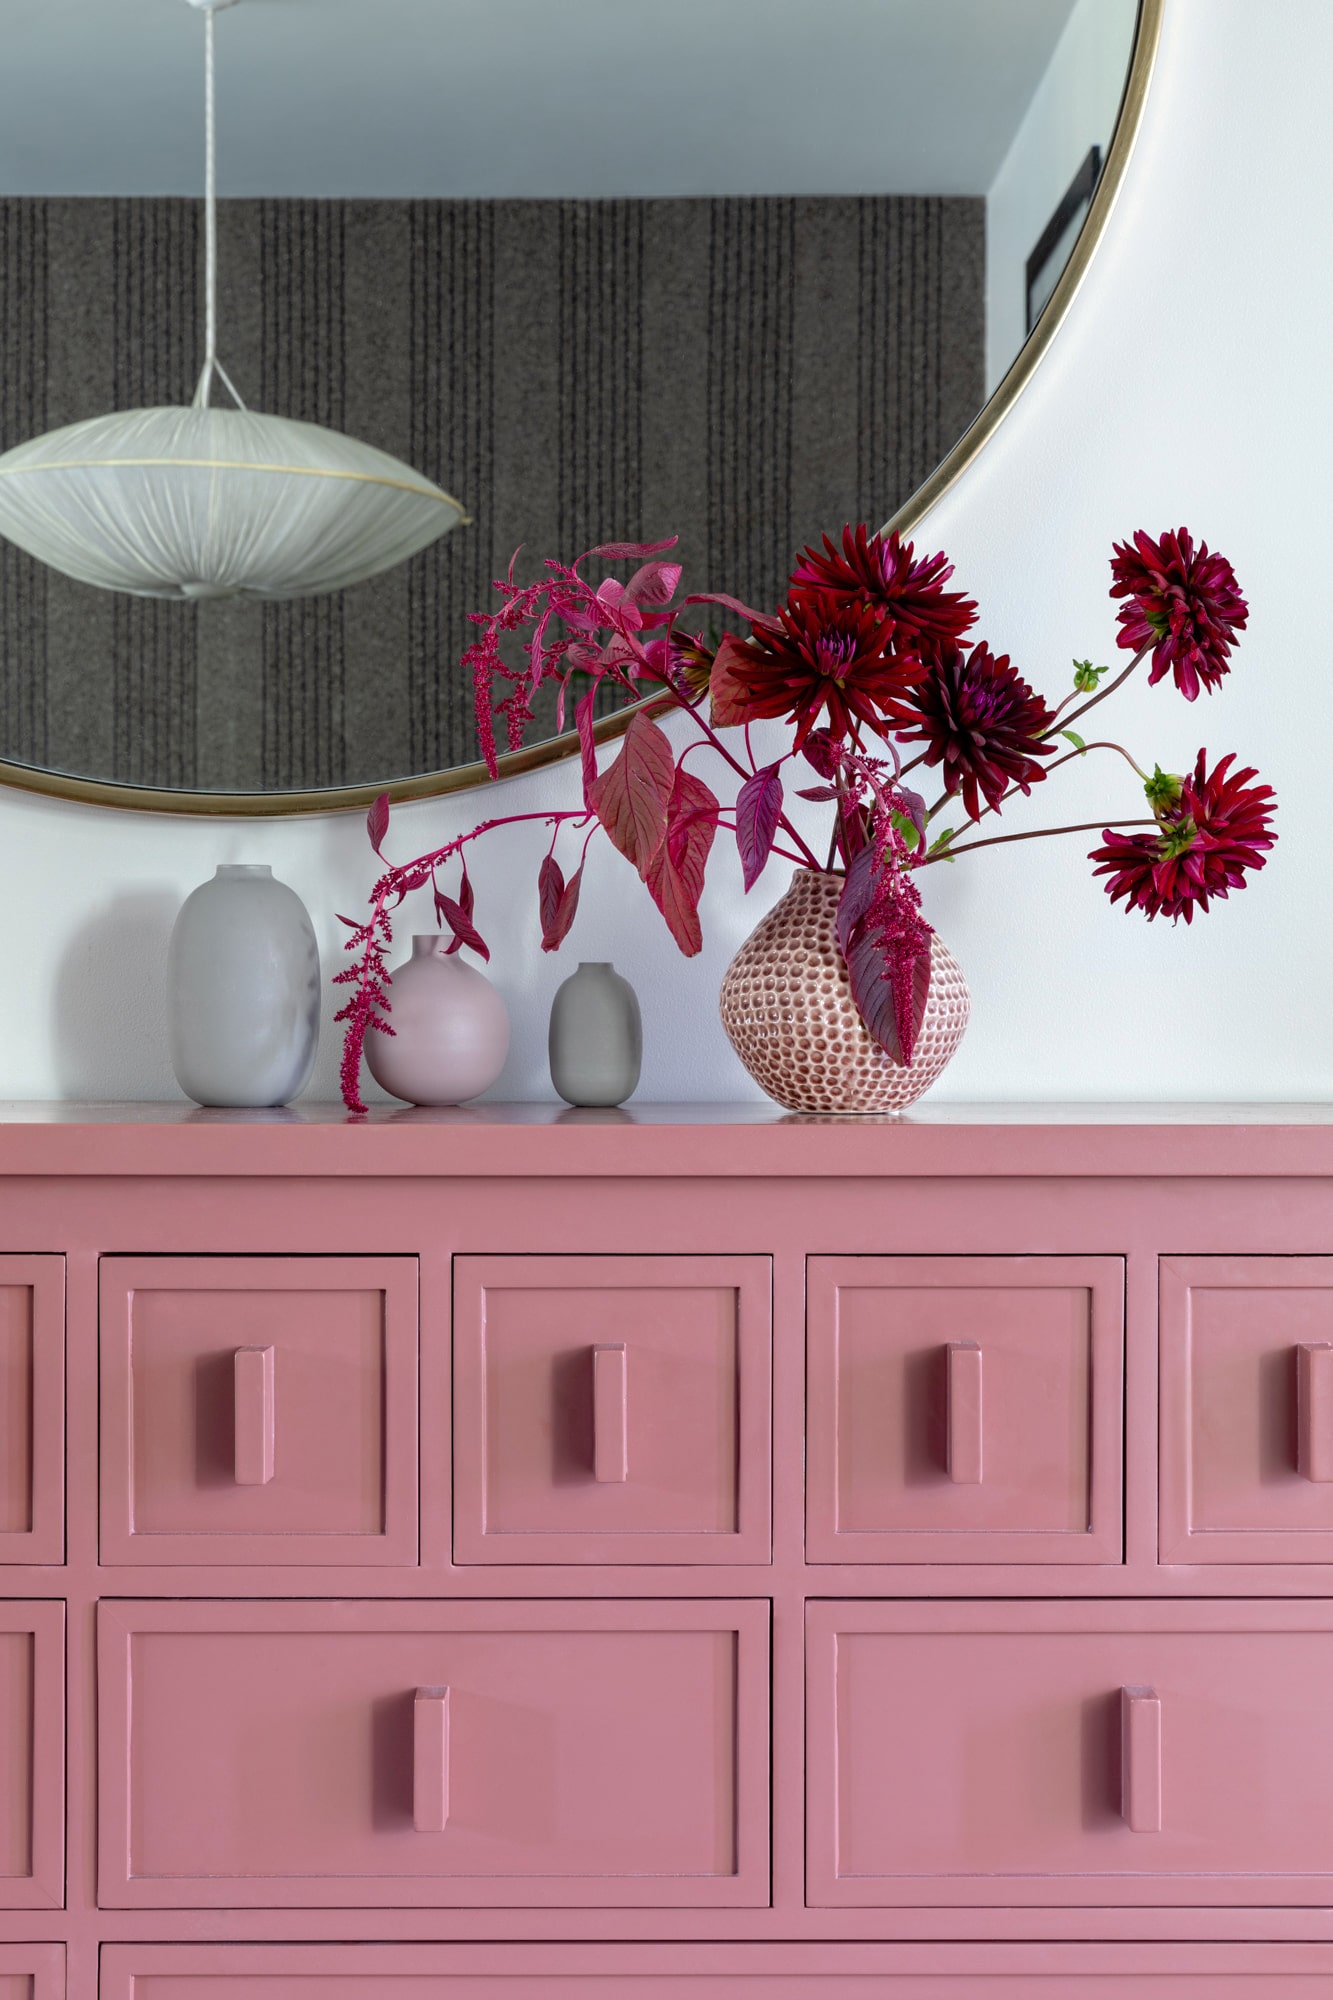 interior detail shot: pink cabinet, burgundy flowers, mirror with a ceiling lamp reflection